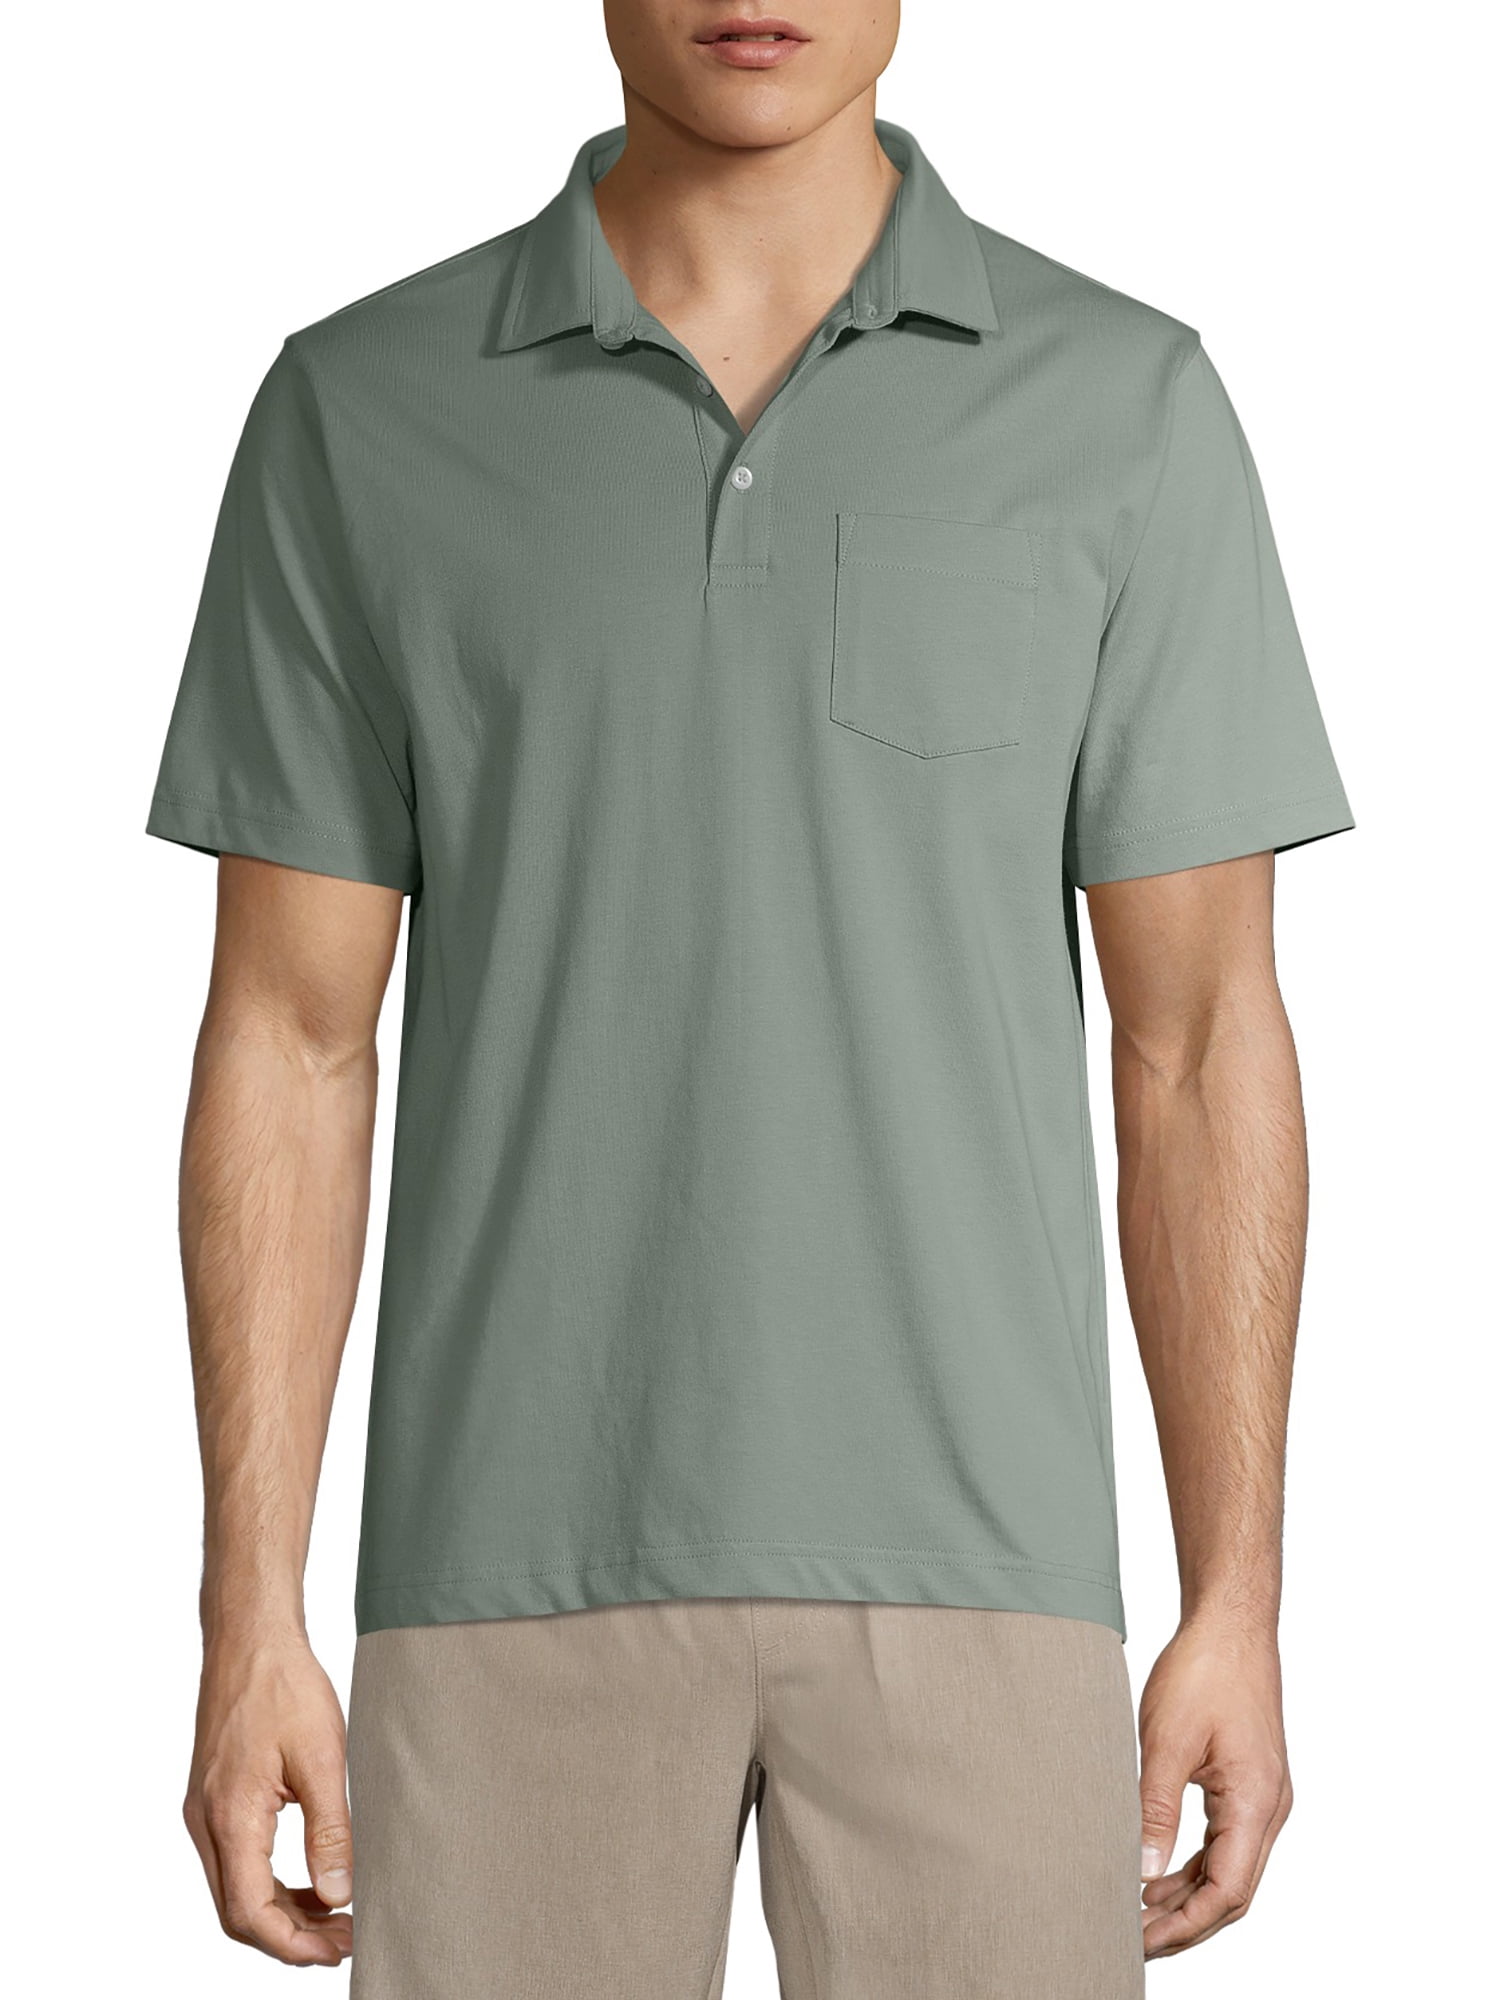 2-PACK~St John's Bay Big & Tall Short Sleeve Heritage~Non-Roll Collar Green Polo